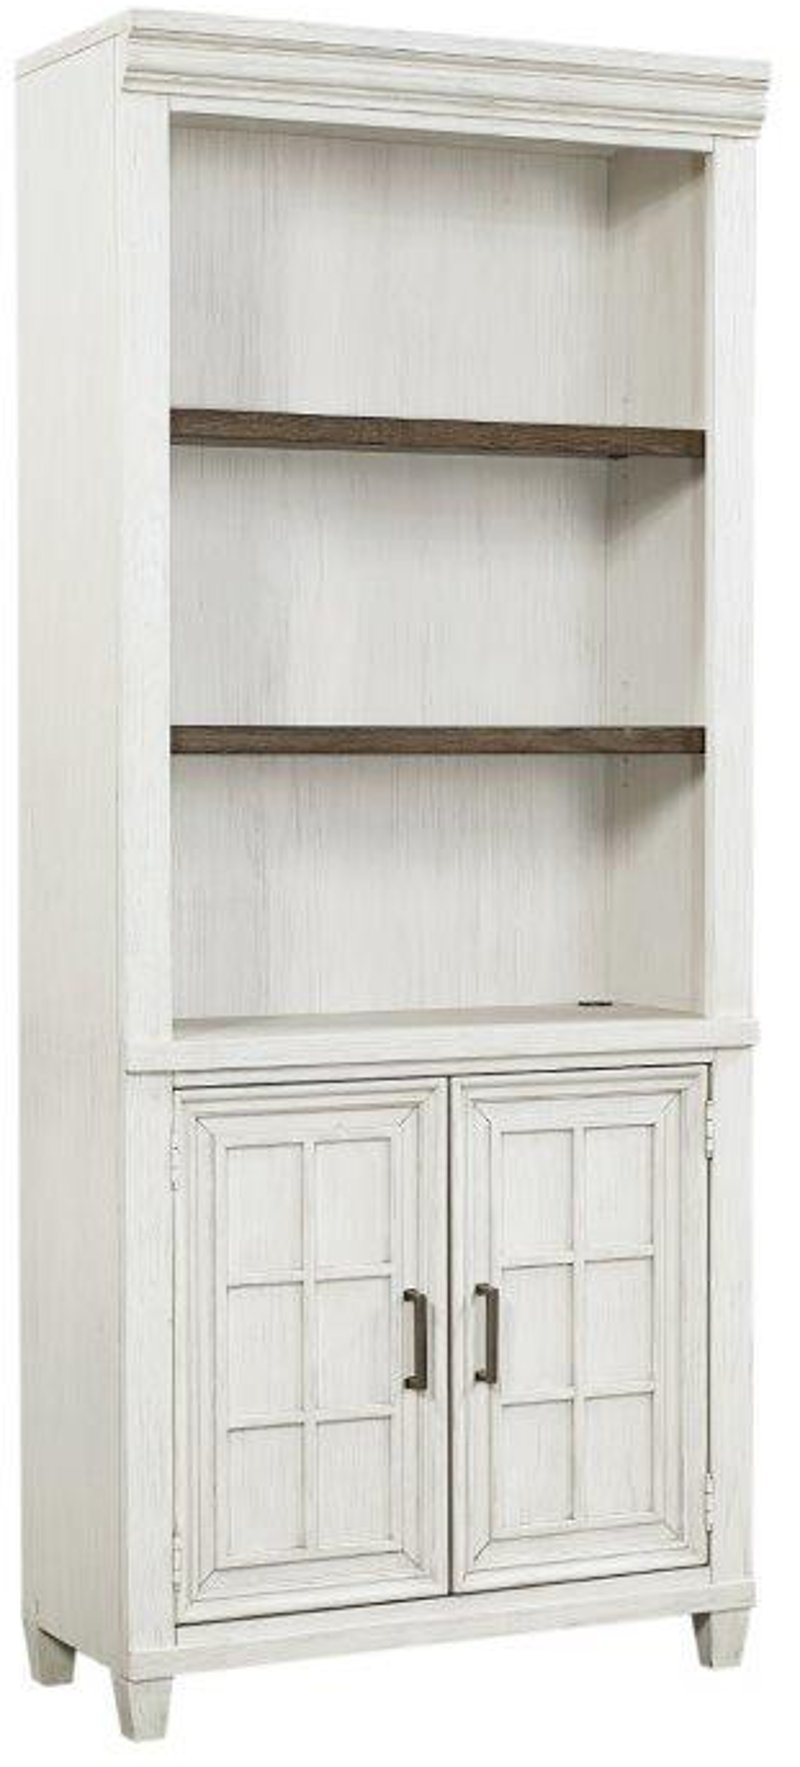 Caraway Antique White Bookcase With, White Bookcase With Drawers On Bottom